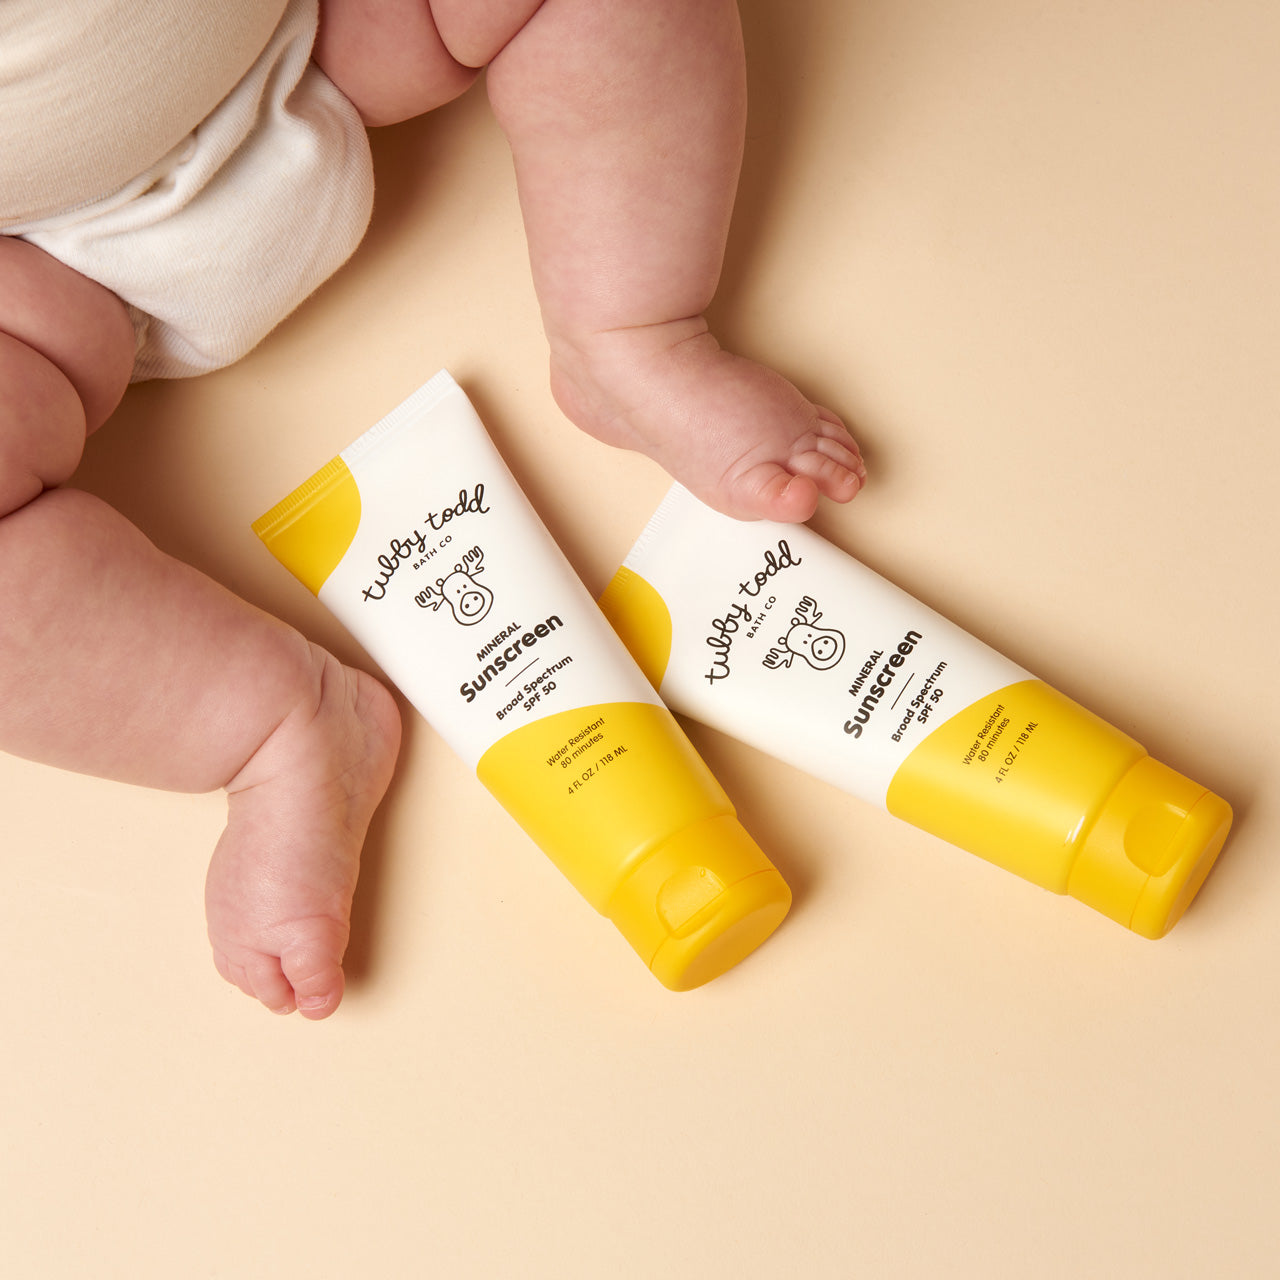 Mineral Sunscreen 2-pack bottles next to baby's feet on cream floor